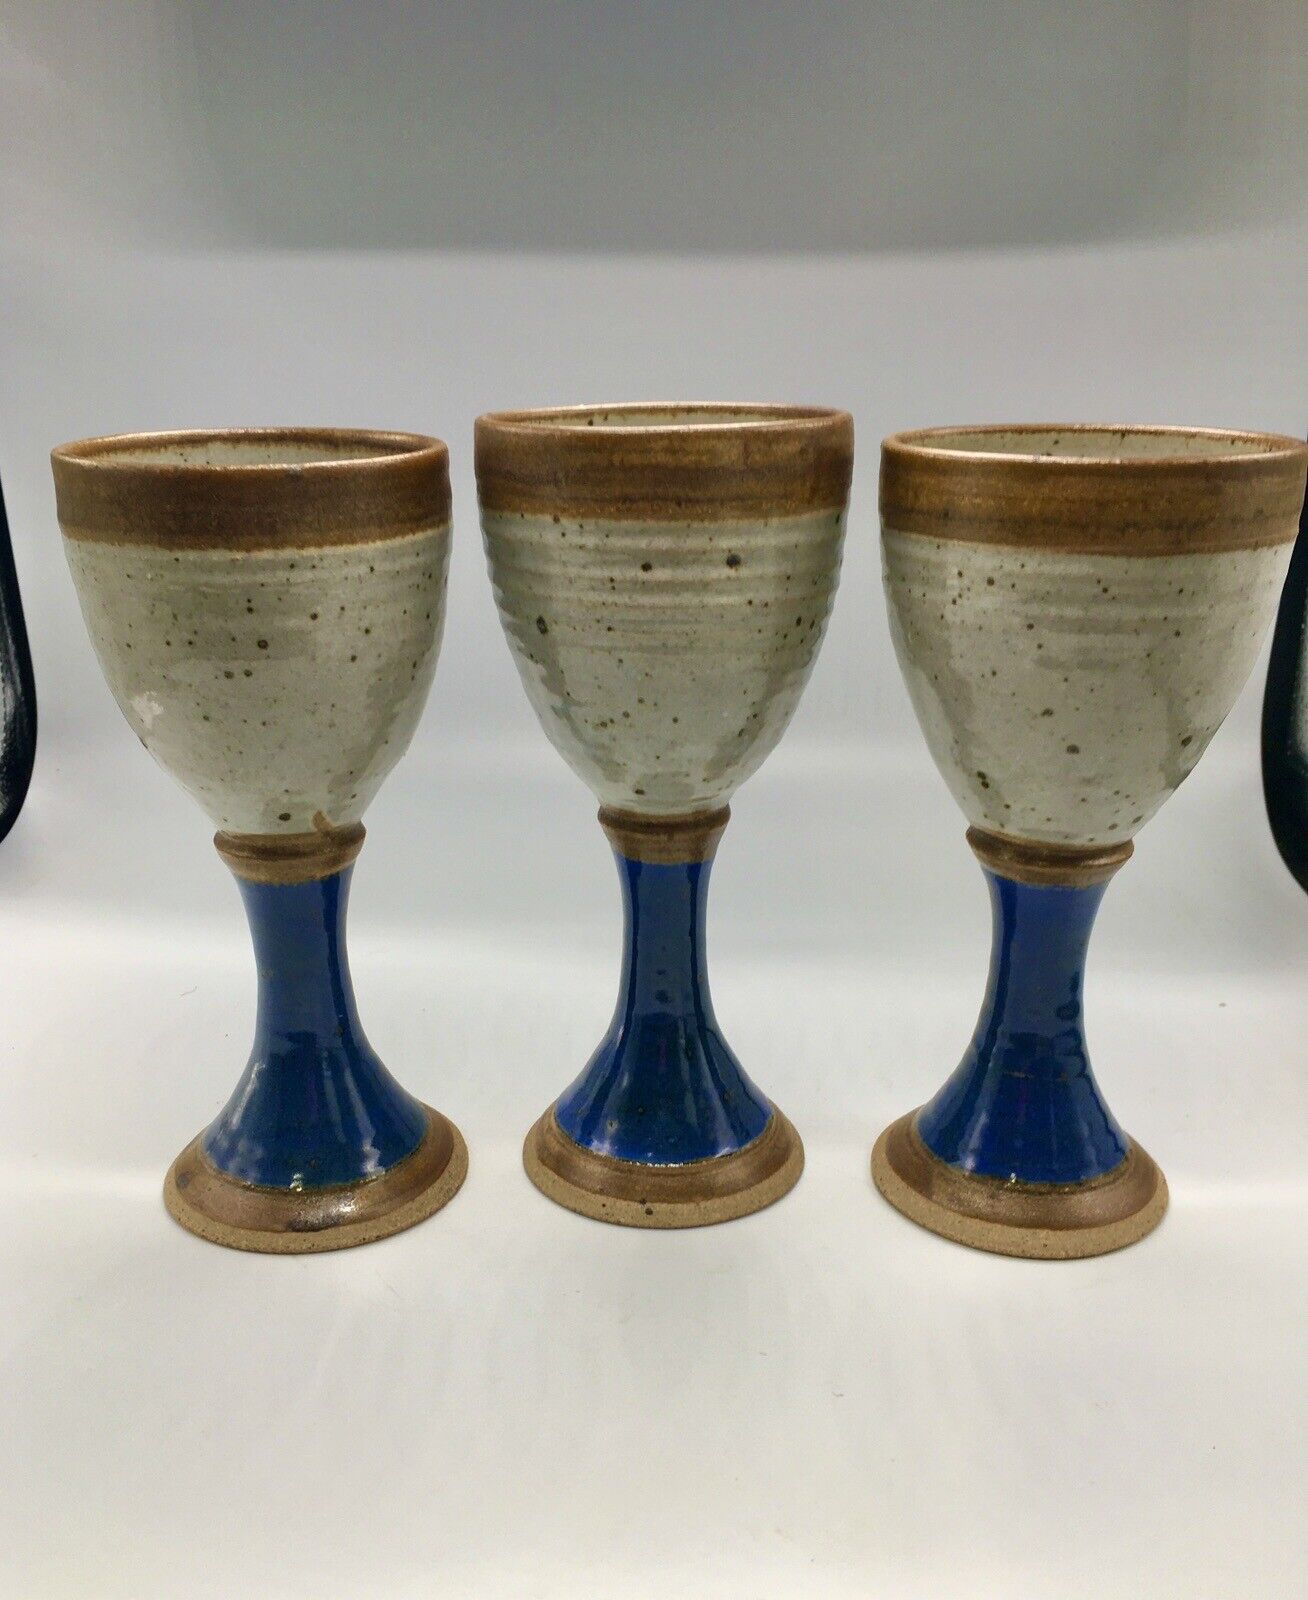 RARE 3 VTG Signed Terry Grimley, Germany Handmade Art Pottery Wine Goblets 7x3”